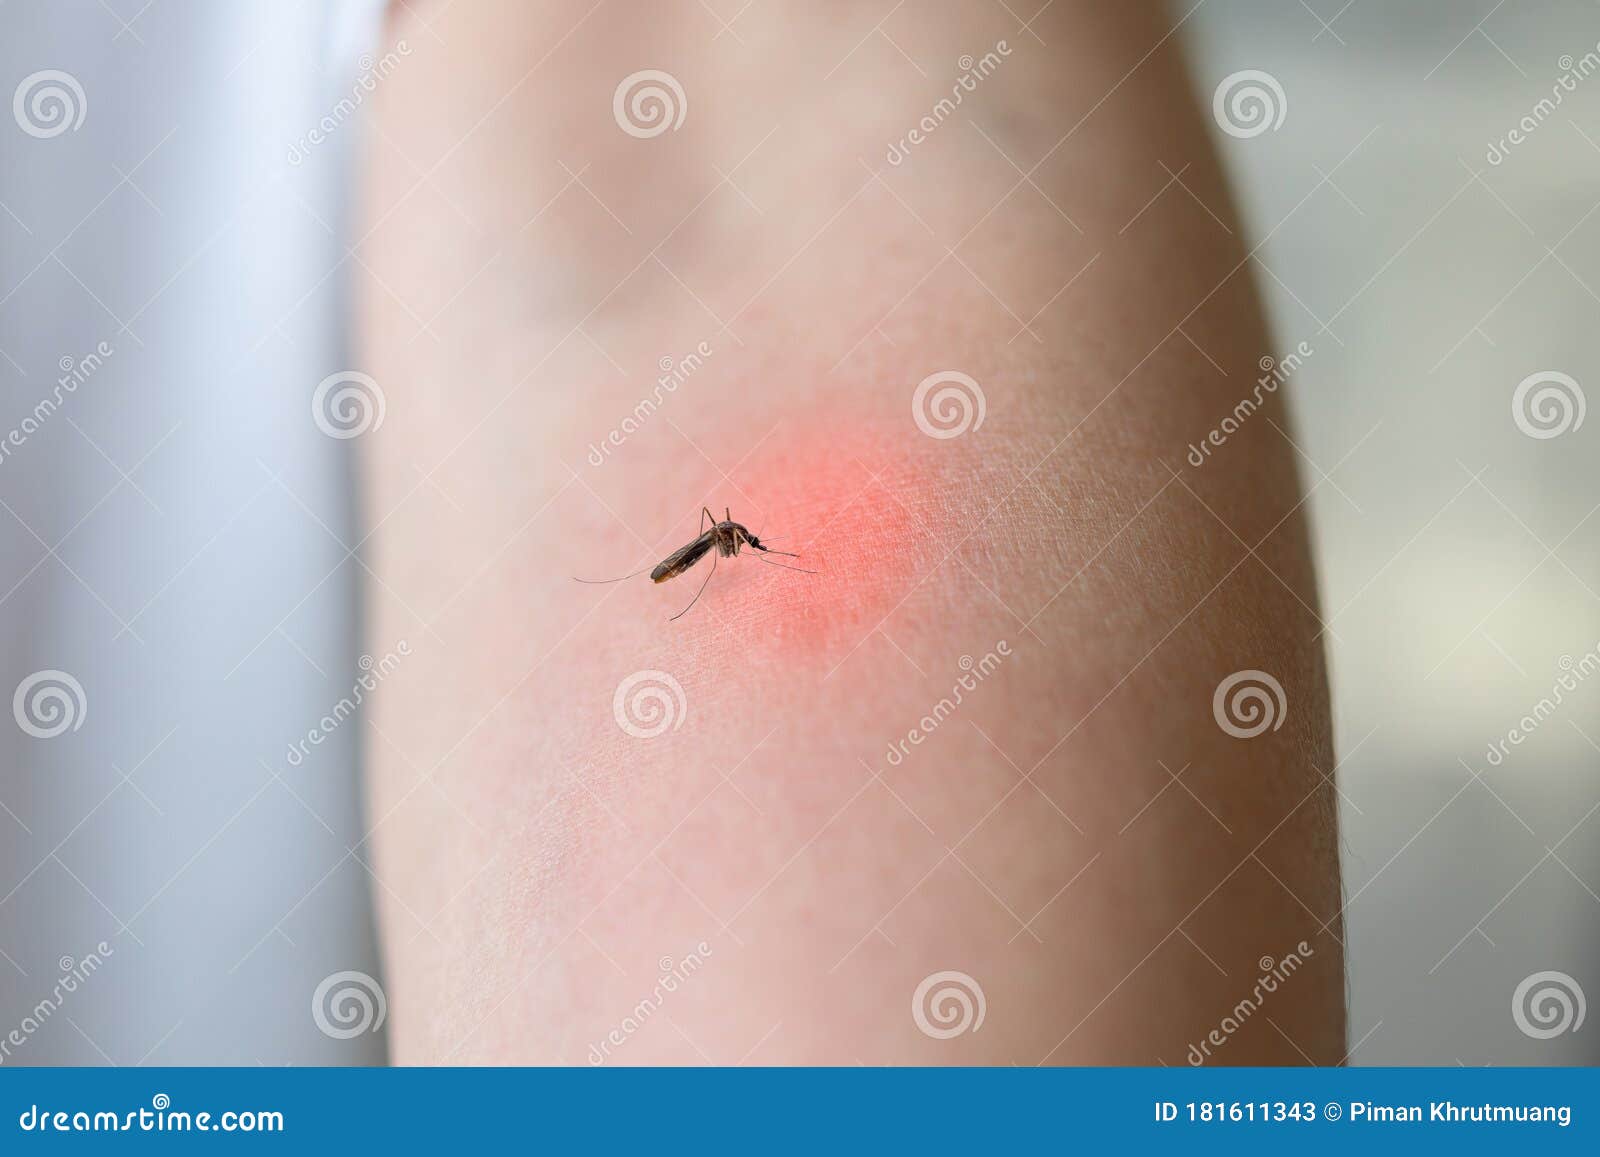 Mosquito Bite On Adult Arm With Skin Rash And Allergy With Red Spot